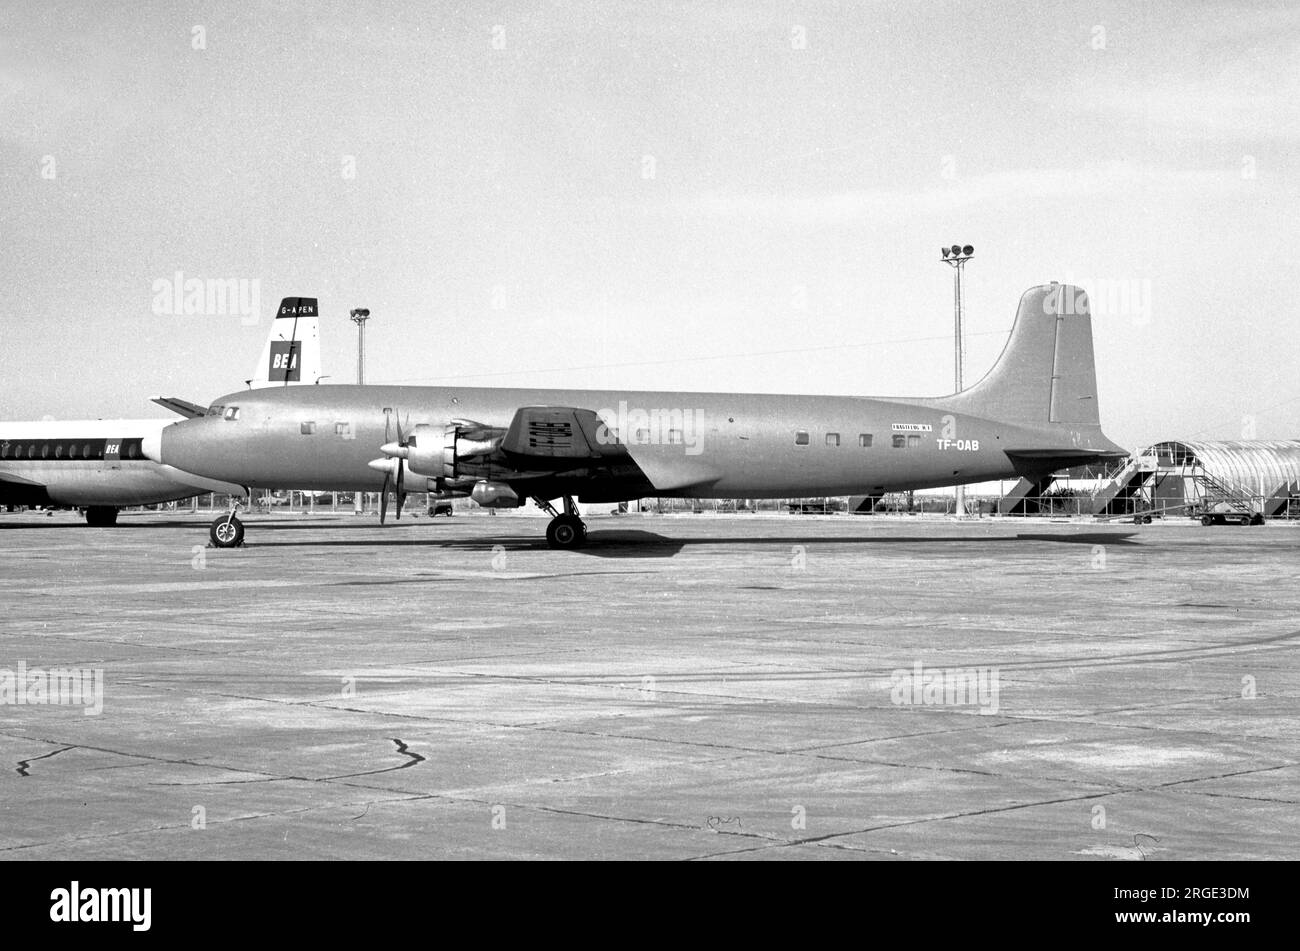 Douglas DC-6B TF-OAB (msn 45067 / 709), of Fragtflug, at Luqa International Airport on 26 January 1970, during its time airlifting aid to Biafra. Stock Photo